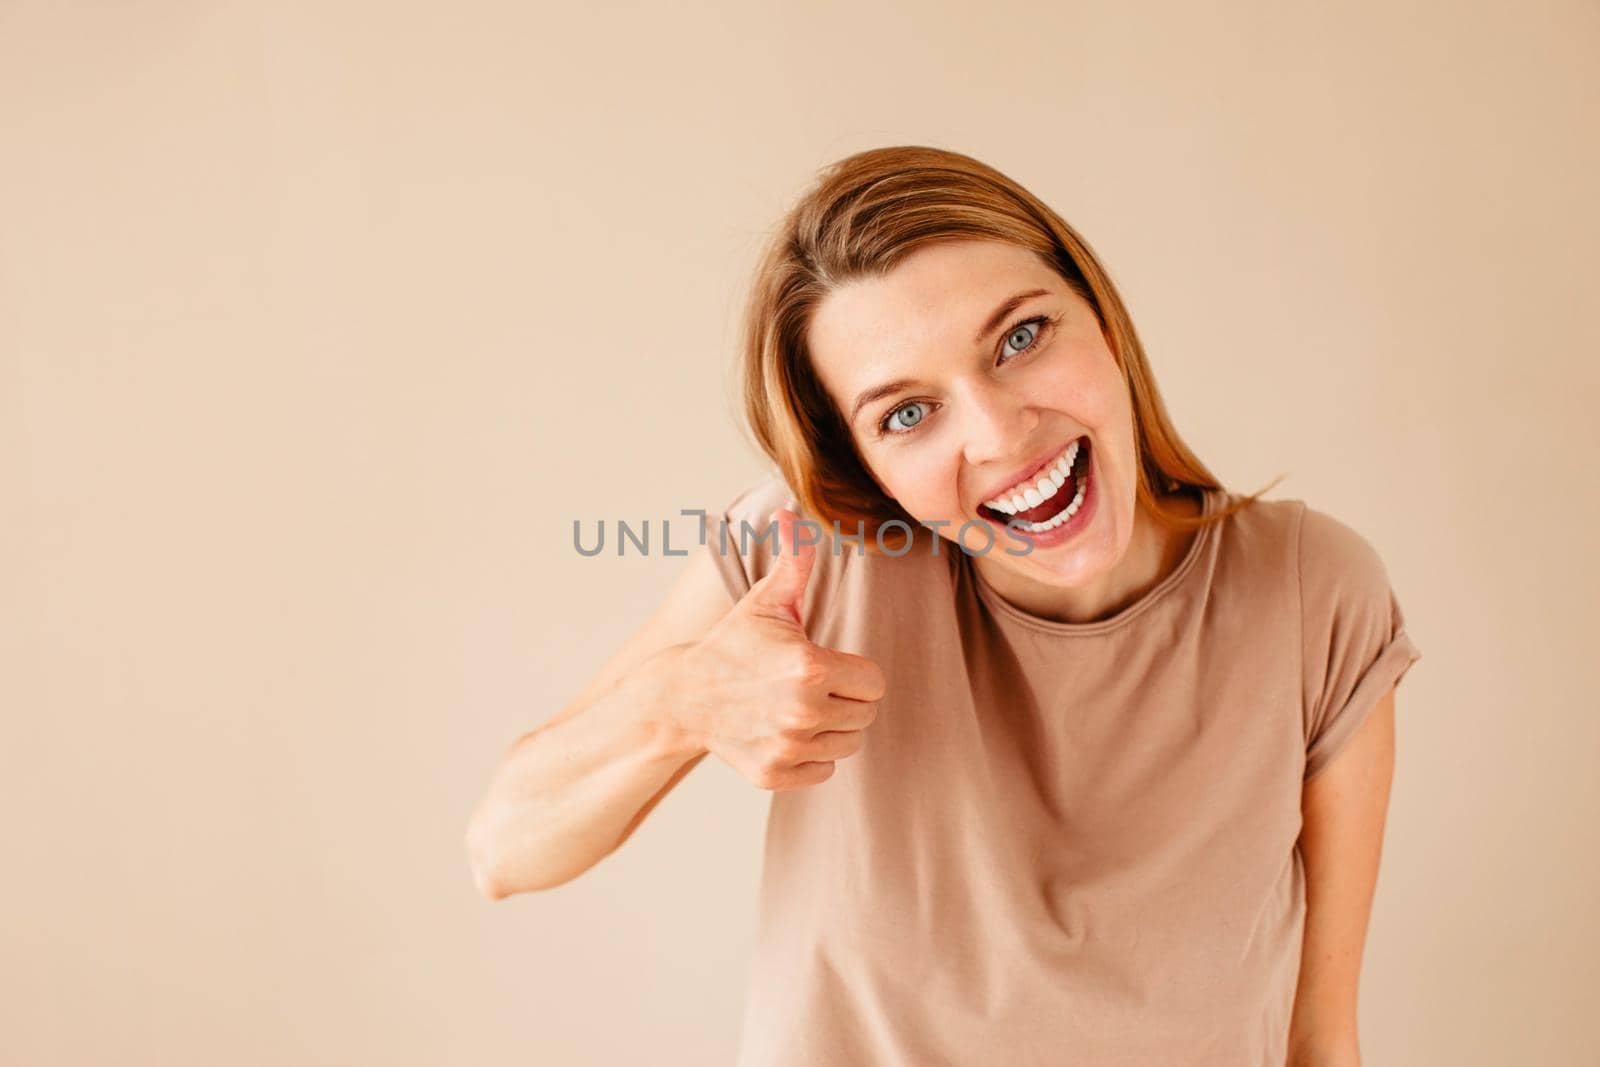 Cheerful young woman smiling and looking at camera while showing thumb up gesture against beige background